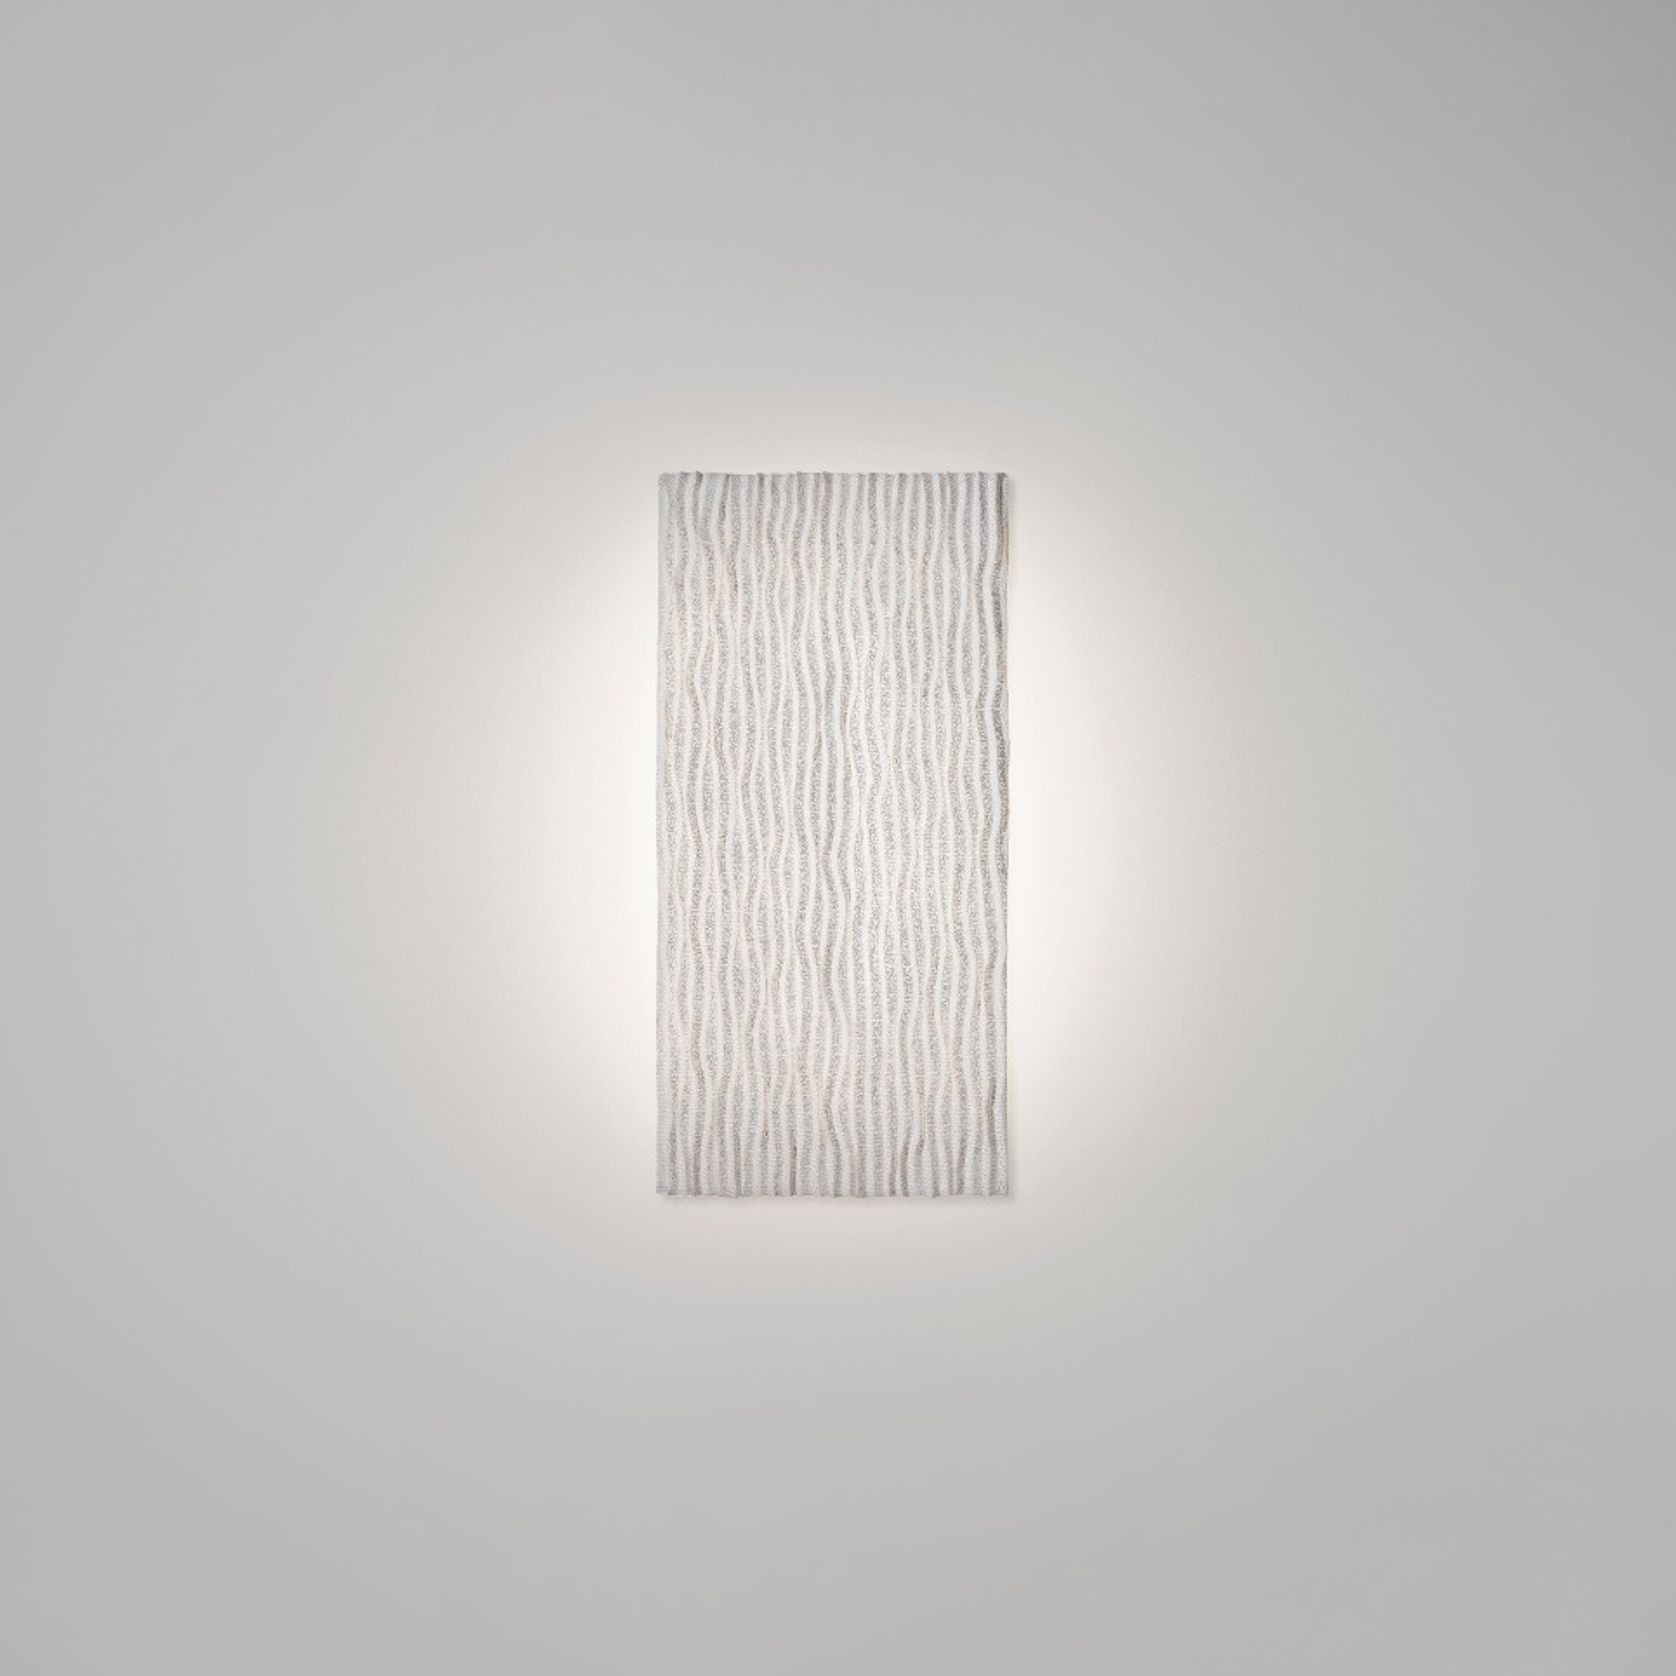 Planum Wall Light by a-emotional light gallery detail image